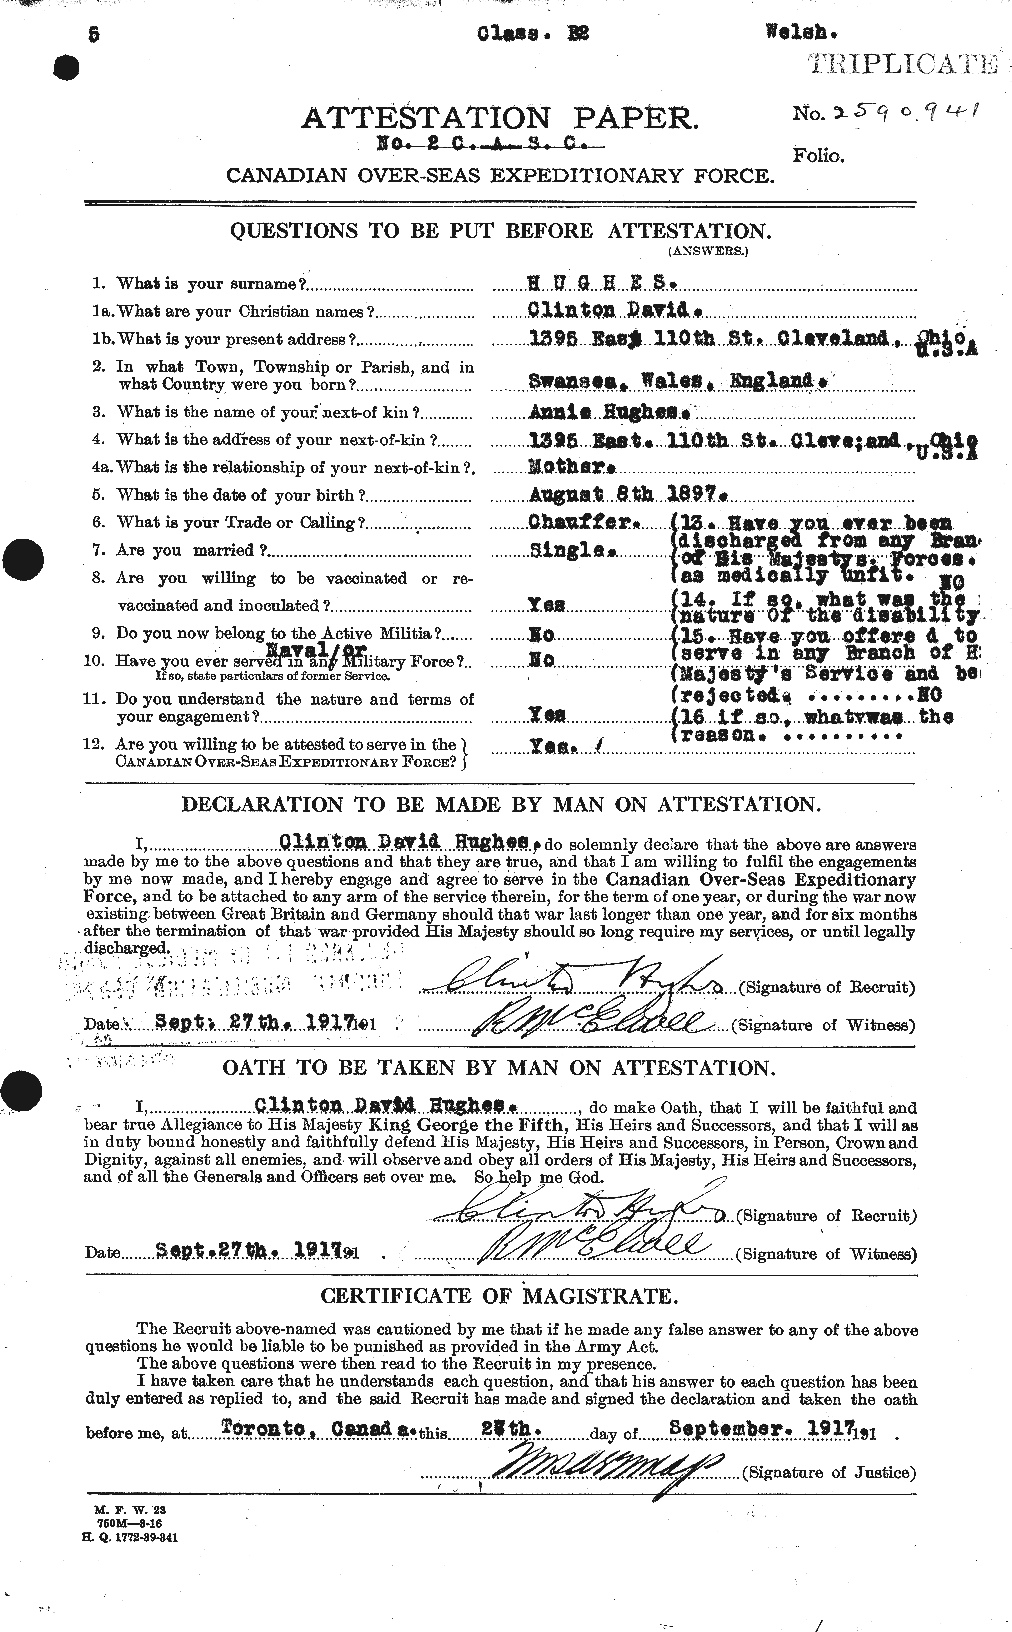 Personnel Records of the First World War - CEF 402632a